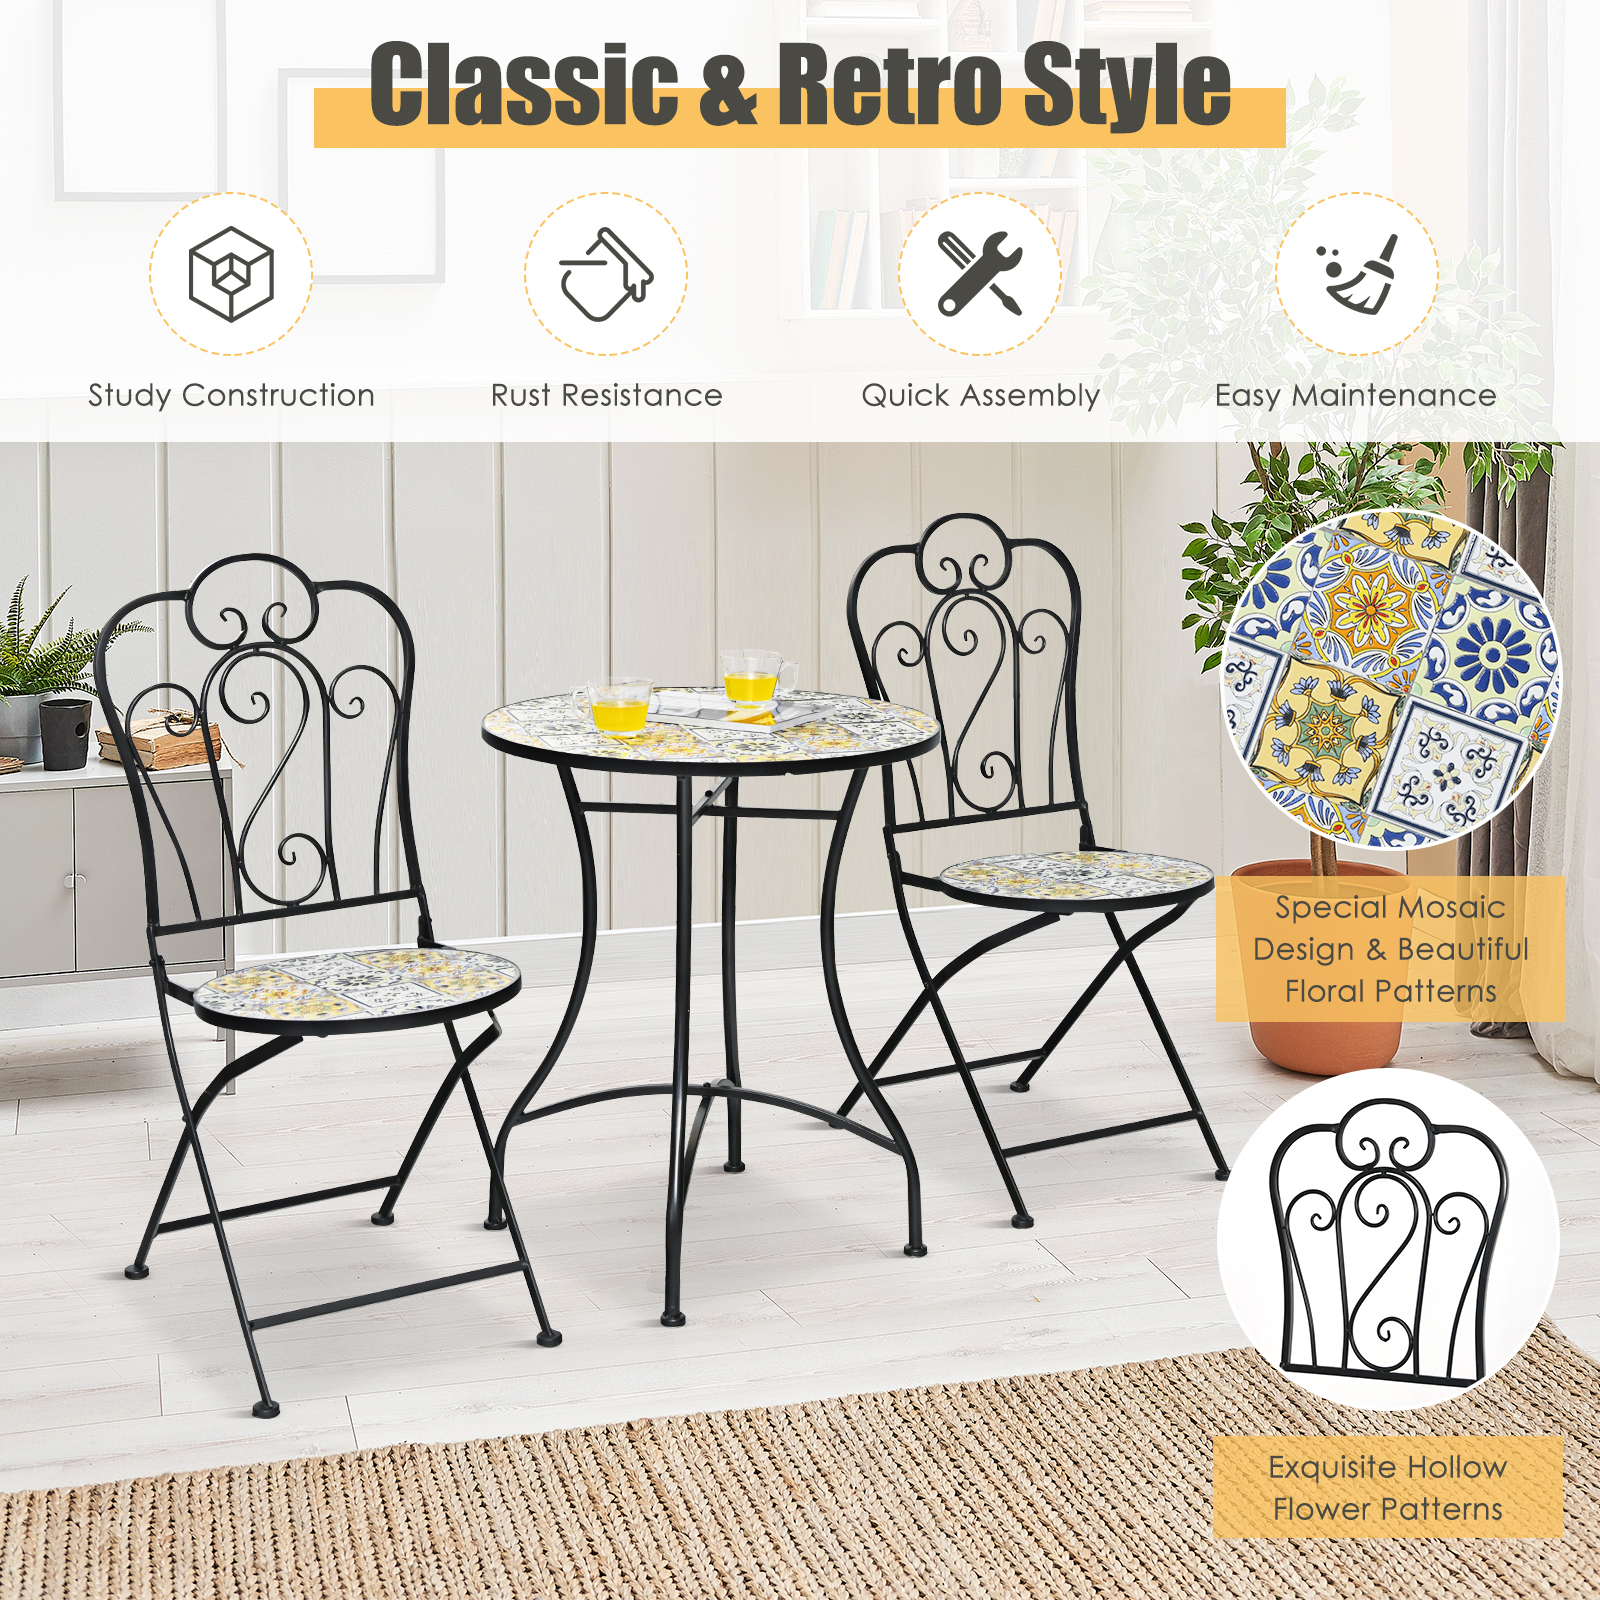 Patiojoy 3PCS Patio Mosaic Design Folding Chairs Side Table Set Bistro Set Classic Furniture Chair Set for Garden - image 5 of 8